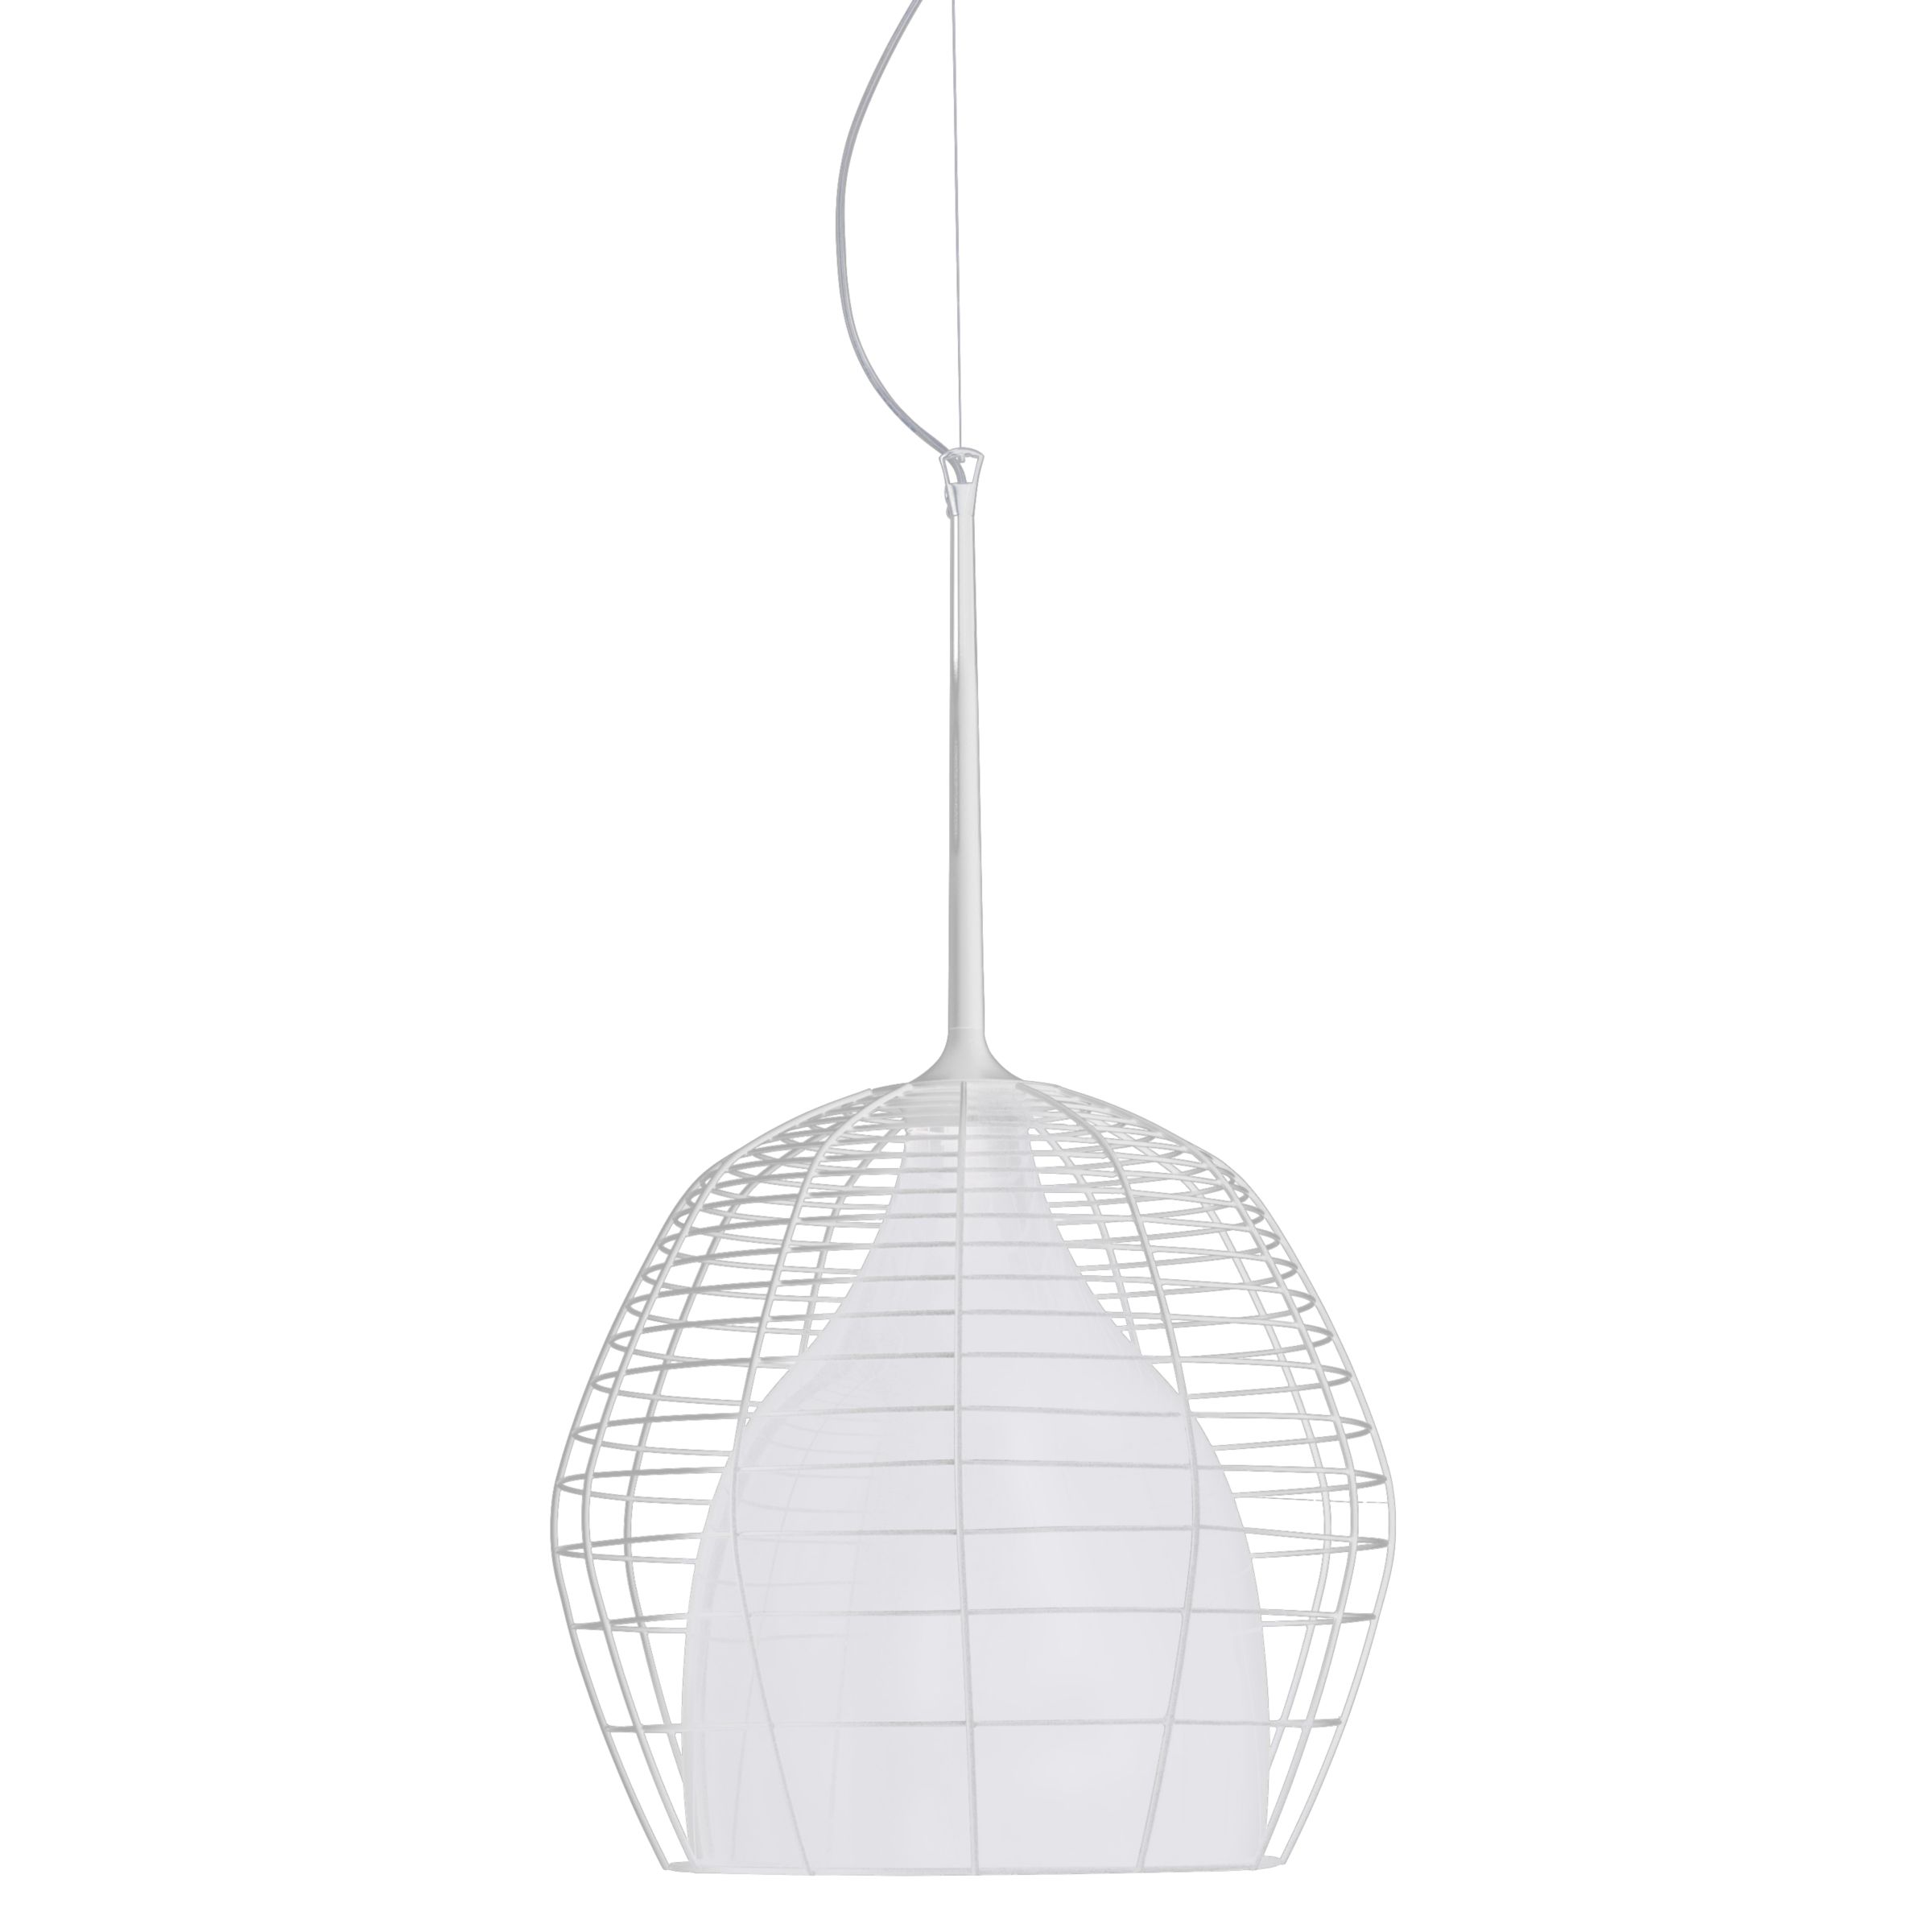 Diesel with Foscarini Cage Ceiling Light, White at John Lewis